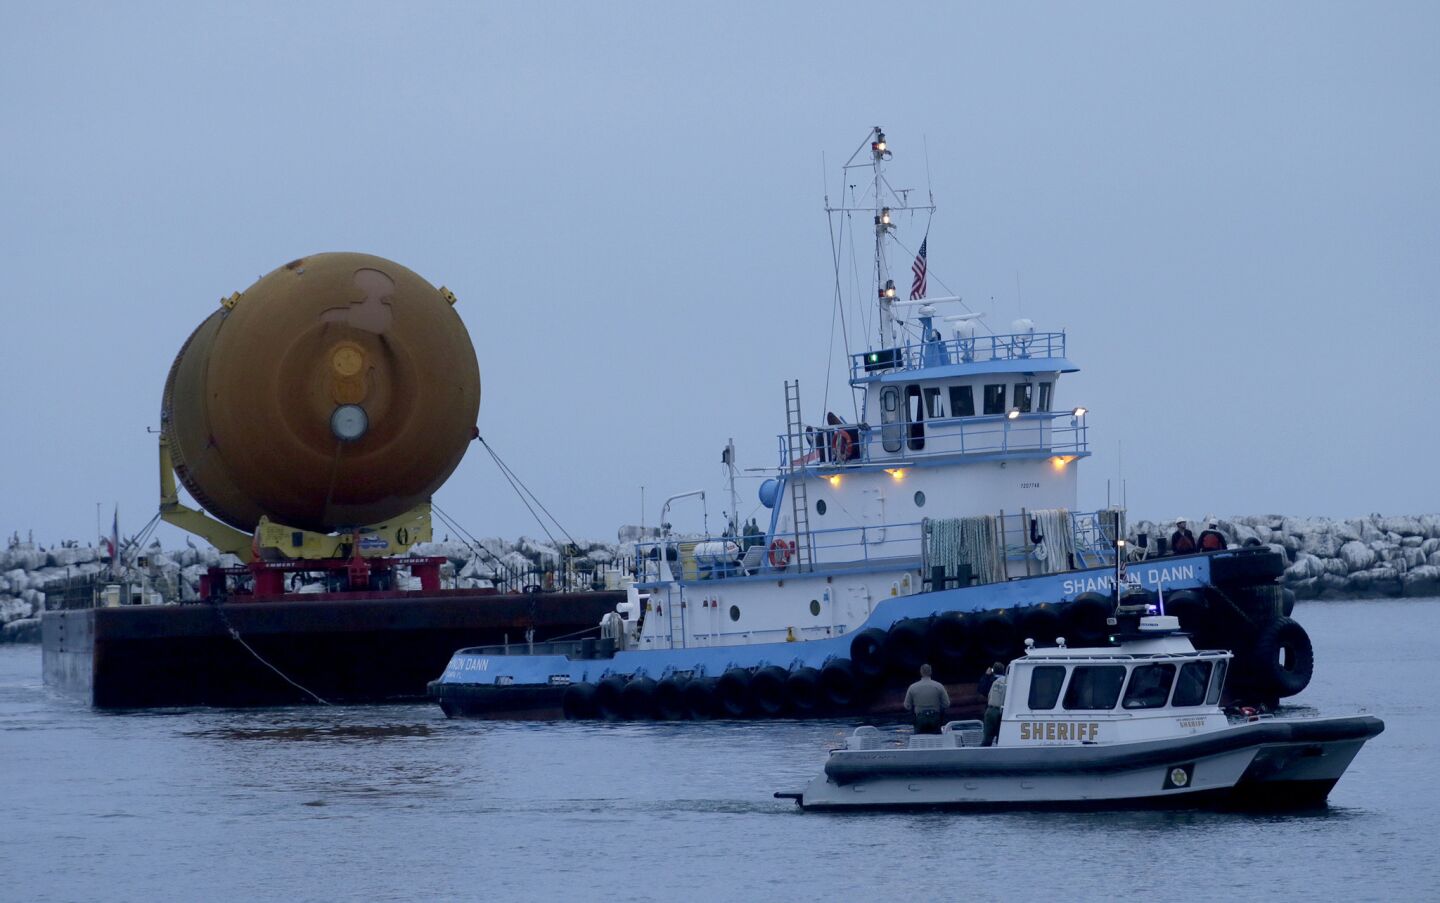 The space shuttle external tank E-94 arrives in Marina del Rey early Wednesday morning.